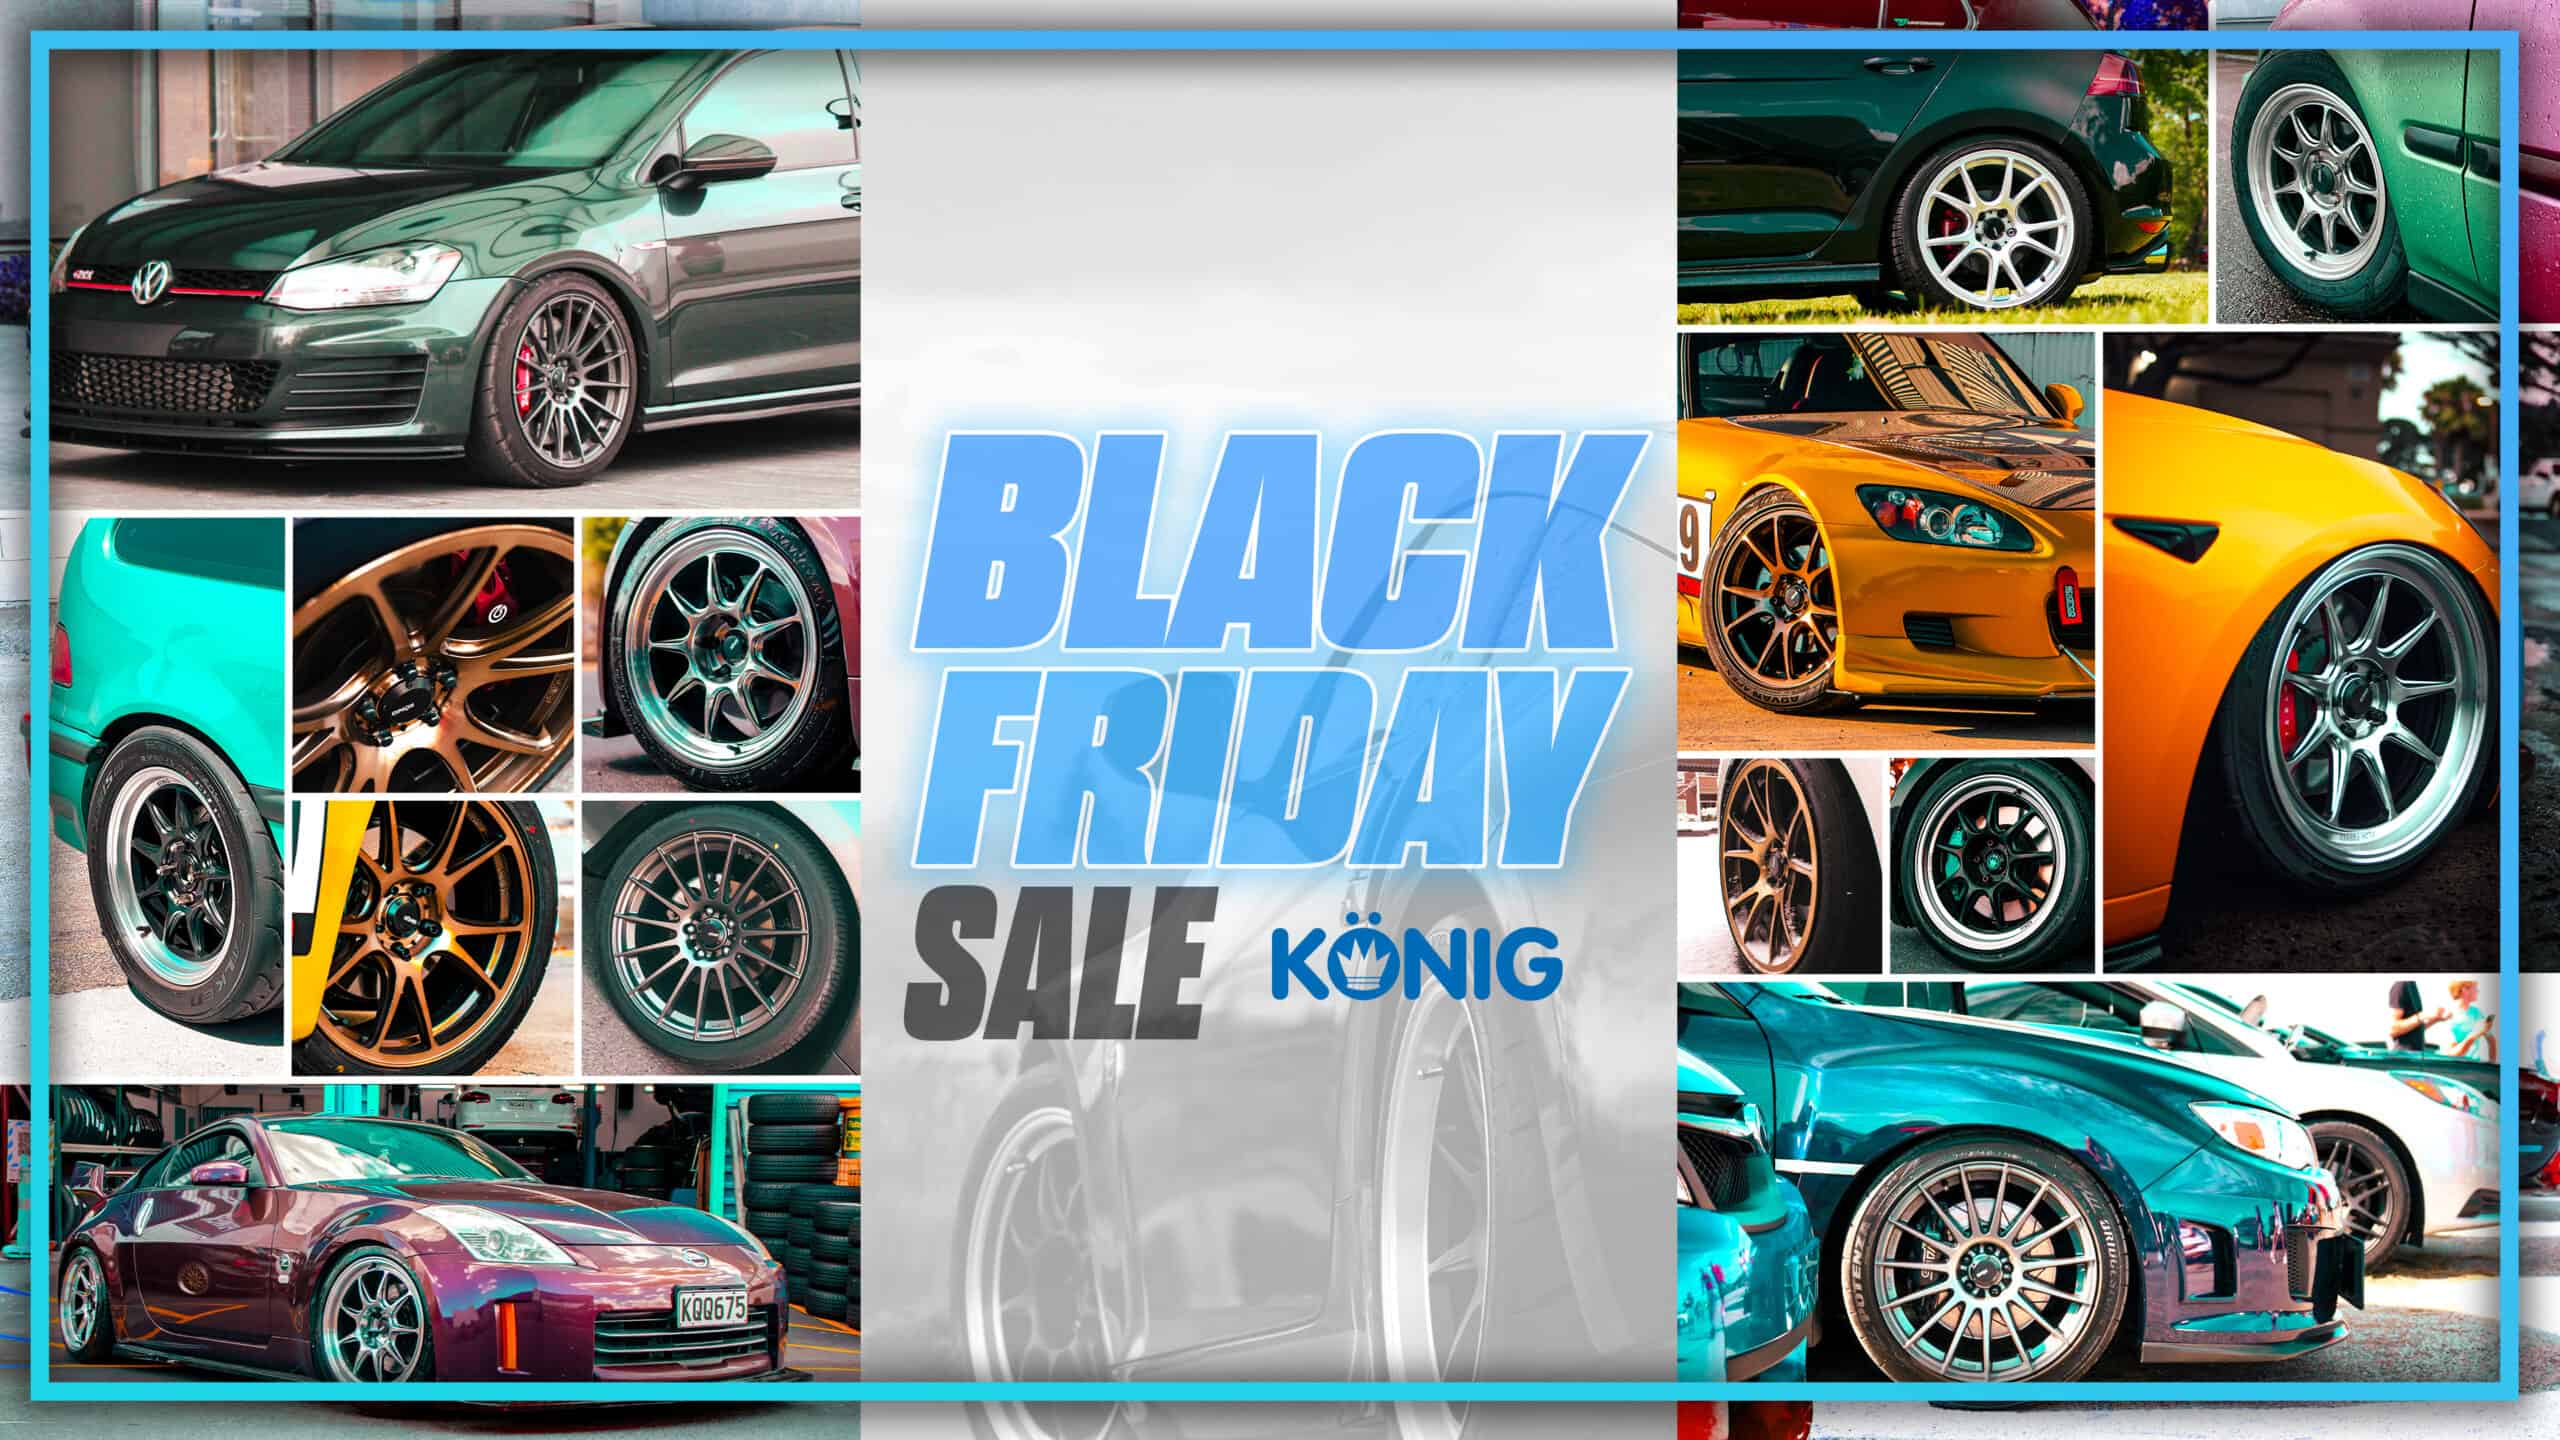 Black Friday, Cyber Monday 2023 Sale at  (WELD,  FORGESTAR, RACE STAR, FORGELINE): Unbeatable Deals All November!